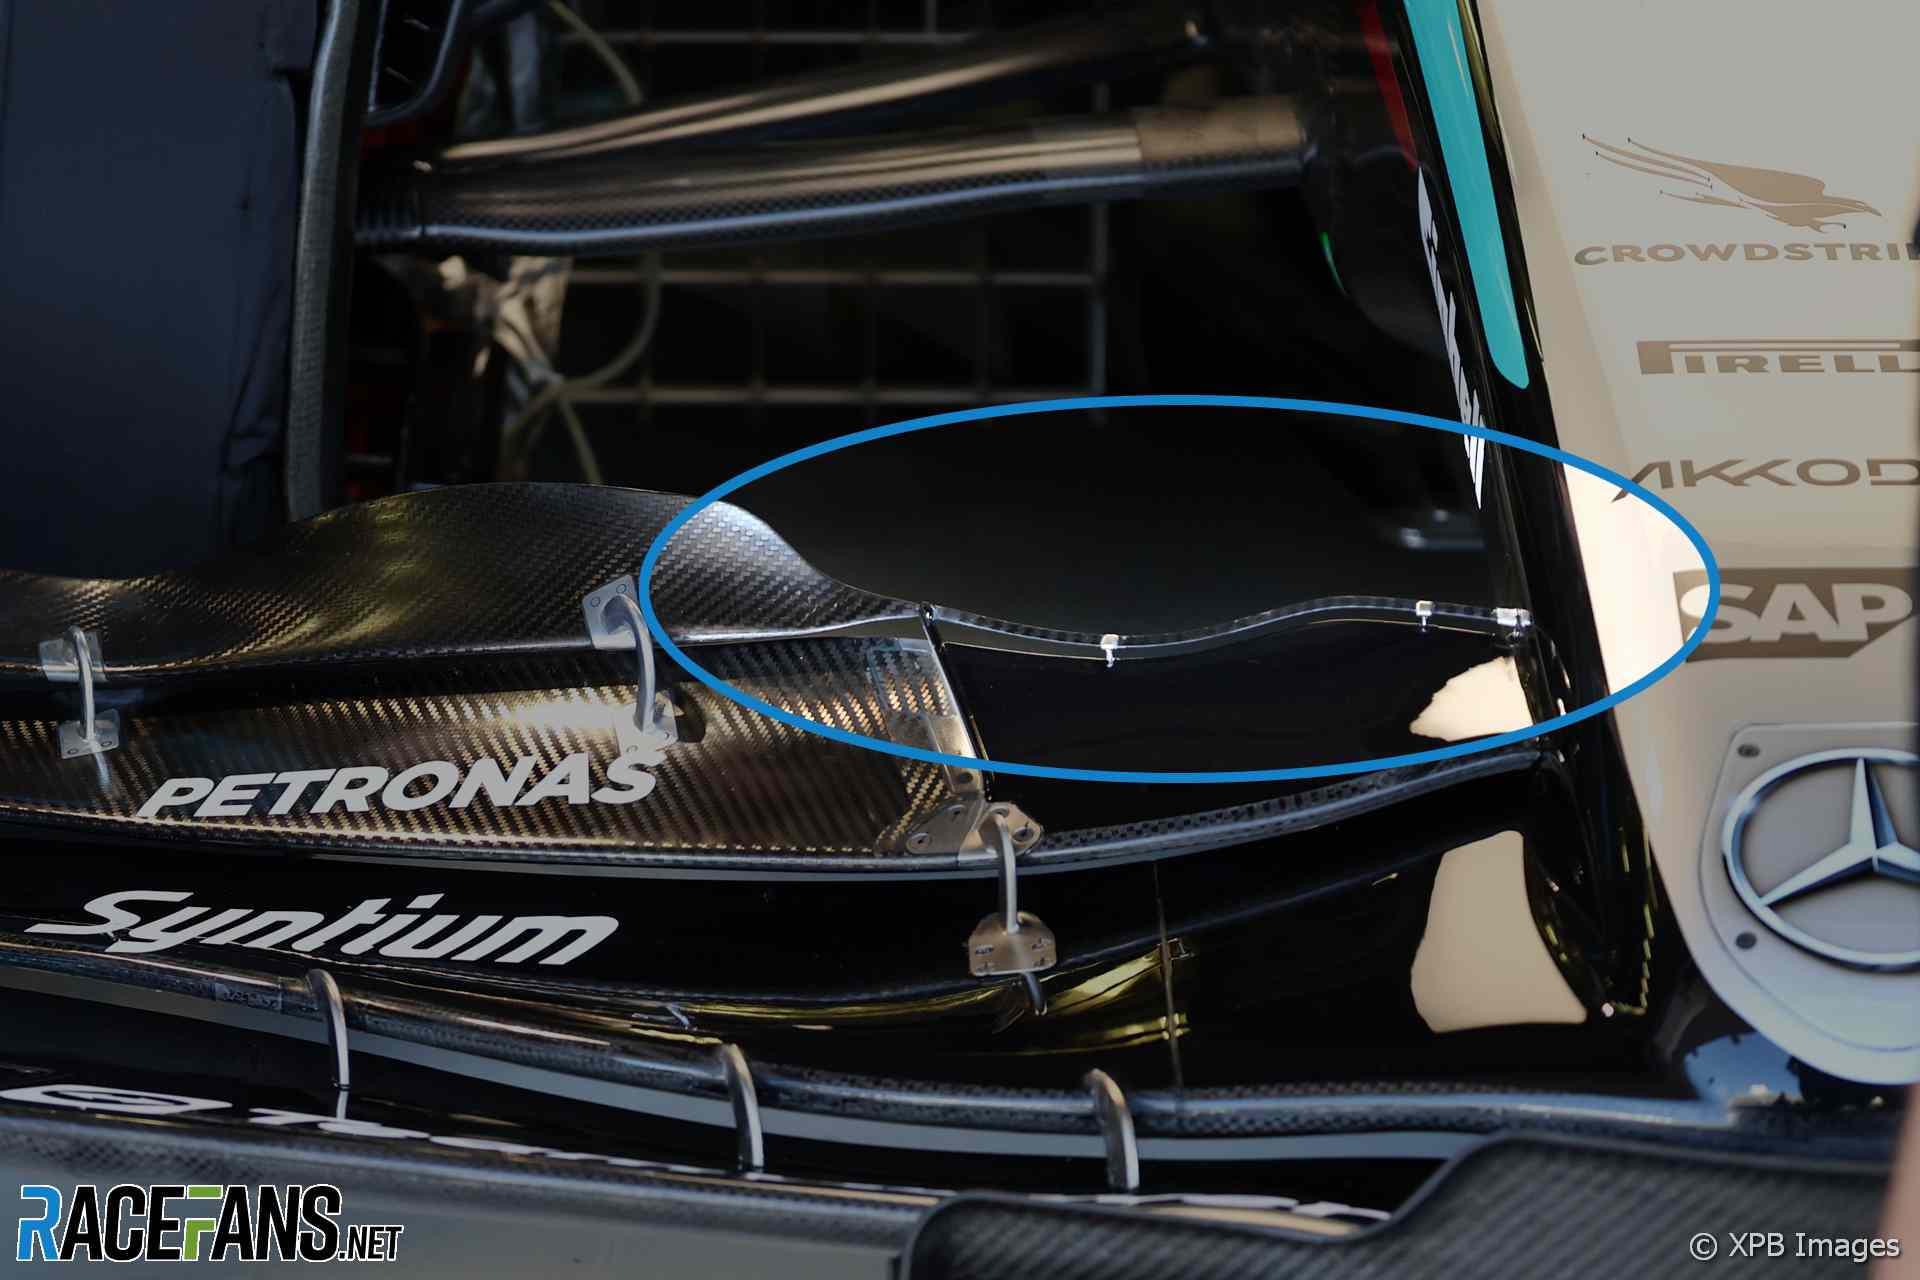 Mercedes W15 front wing design with thin fourth flap highlighted